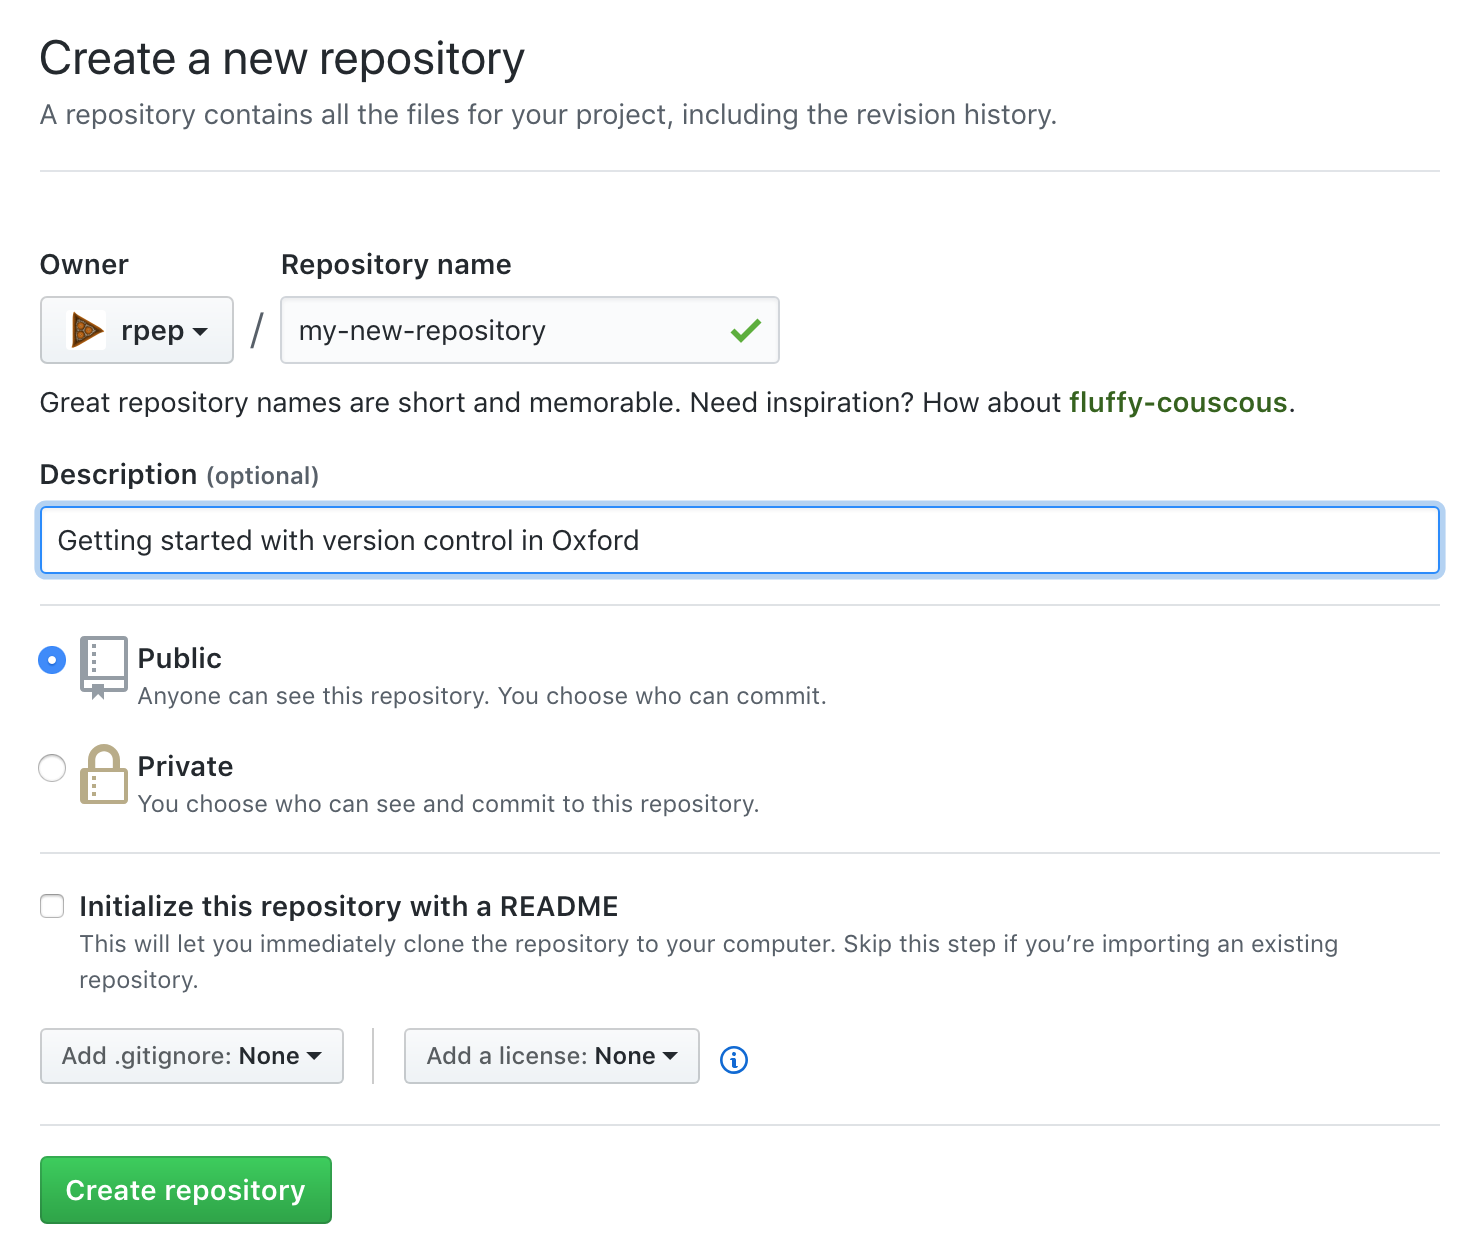 Image showing repository creation